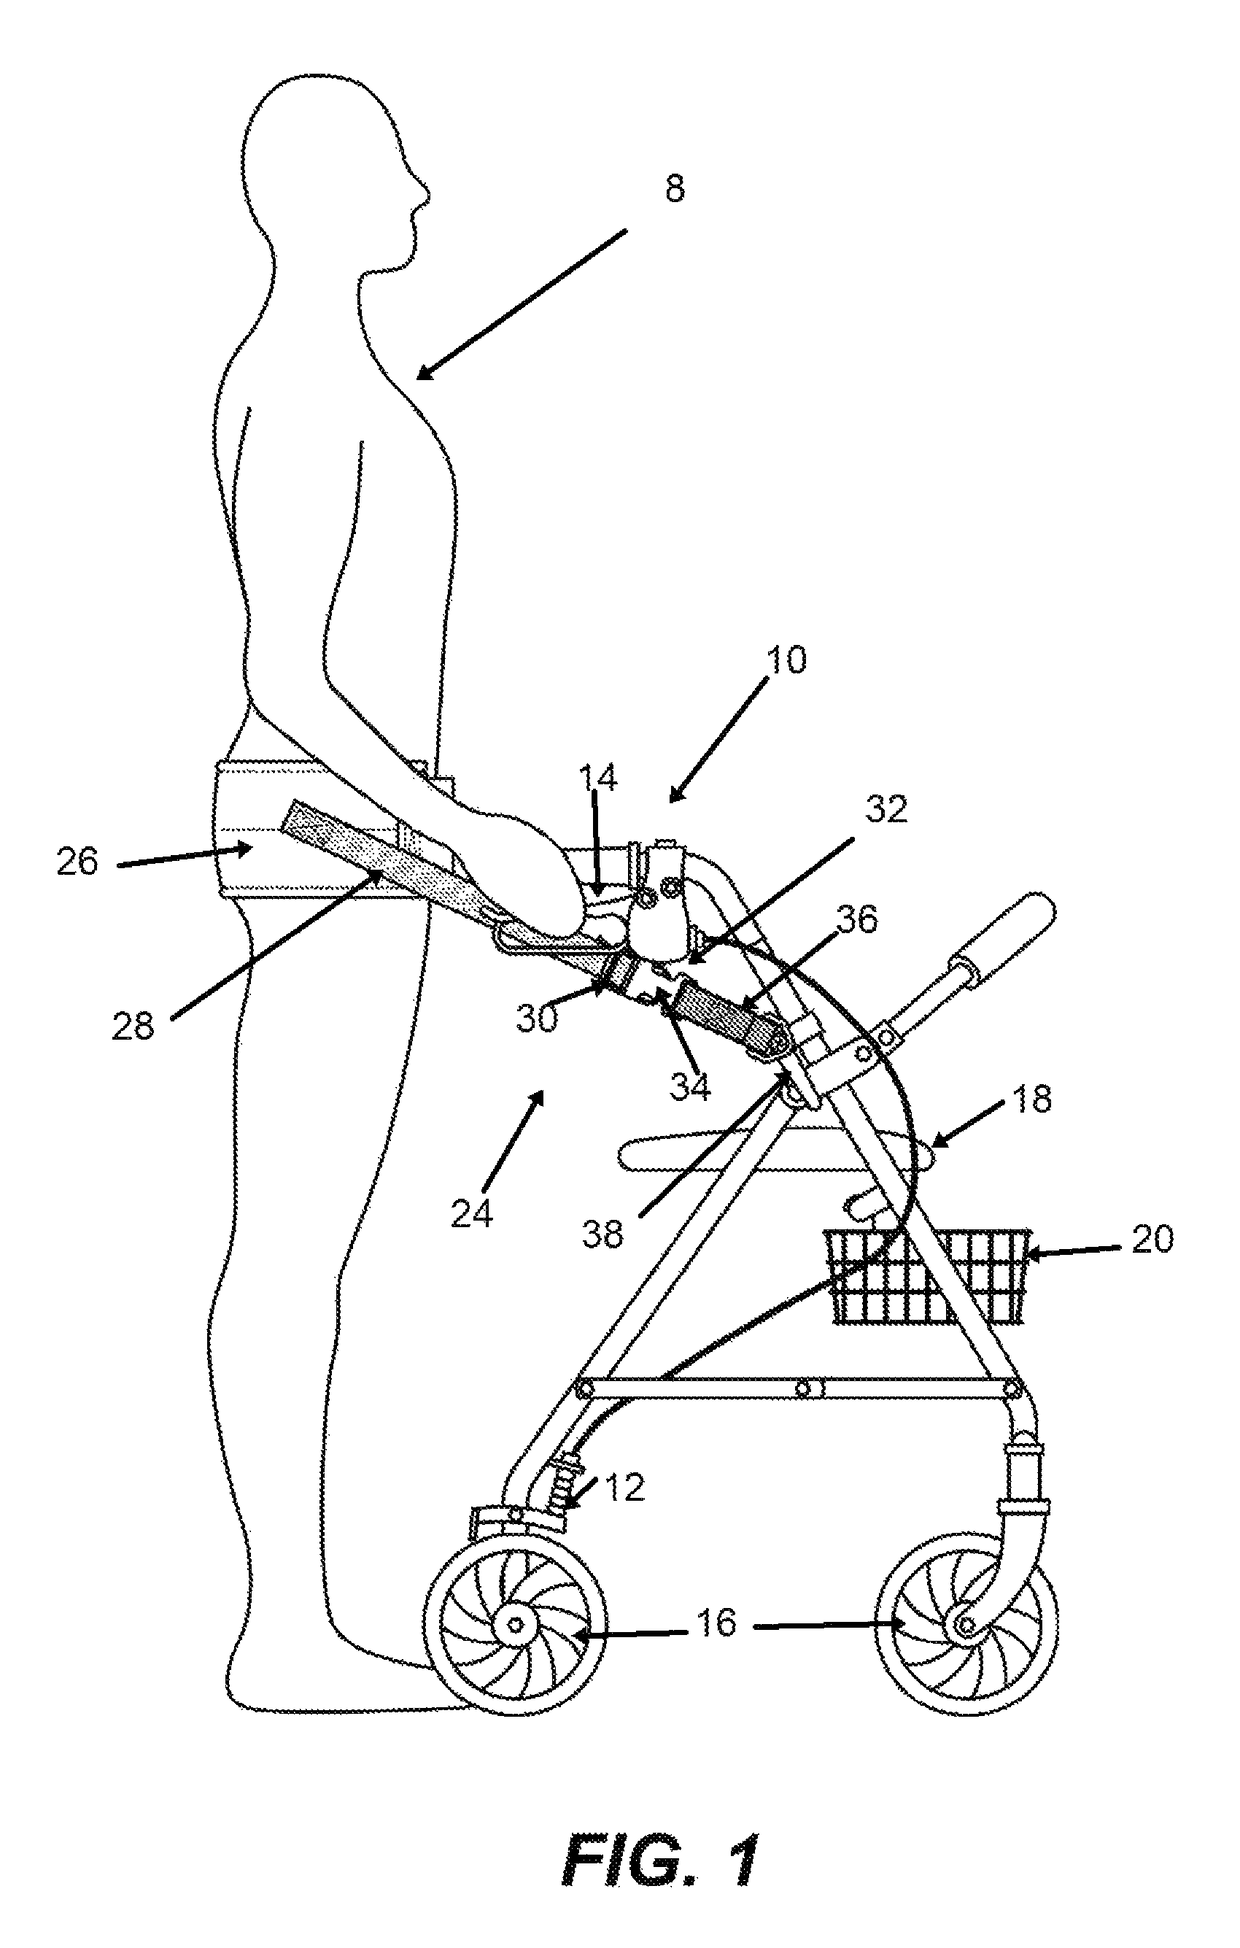 Mobility assistance device